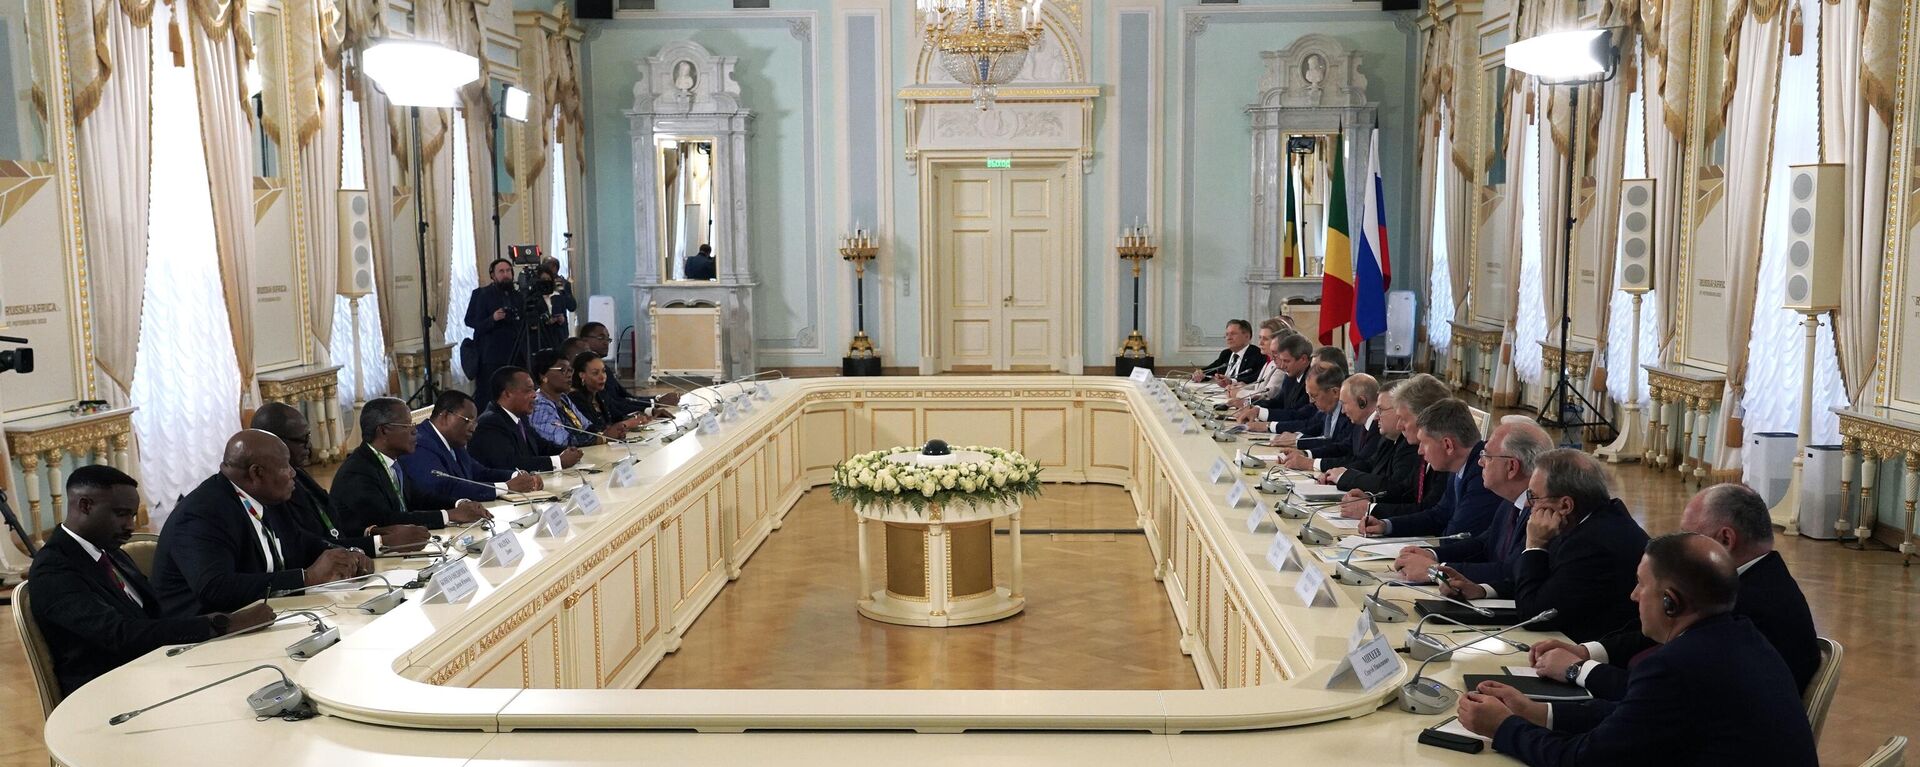 Russian President Vladimir Putin and Congolese President Denis Sassou Nguesso attend a meeting at the Constantine (Konstantinovsky) Palace in Strelna near St. Petersburg, Russia, on July 29, 2023. - Sputnik Africa, 1920, 29.07.2023